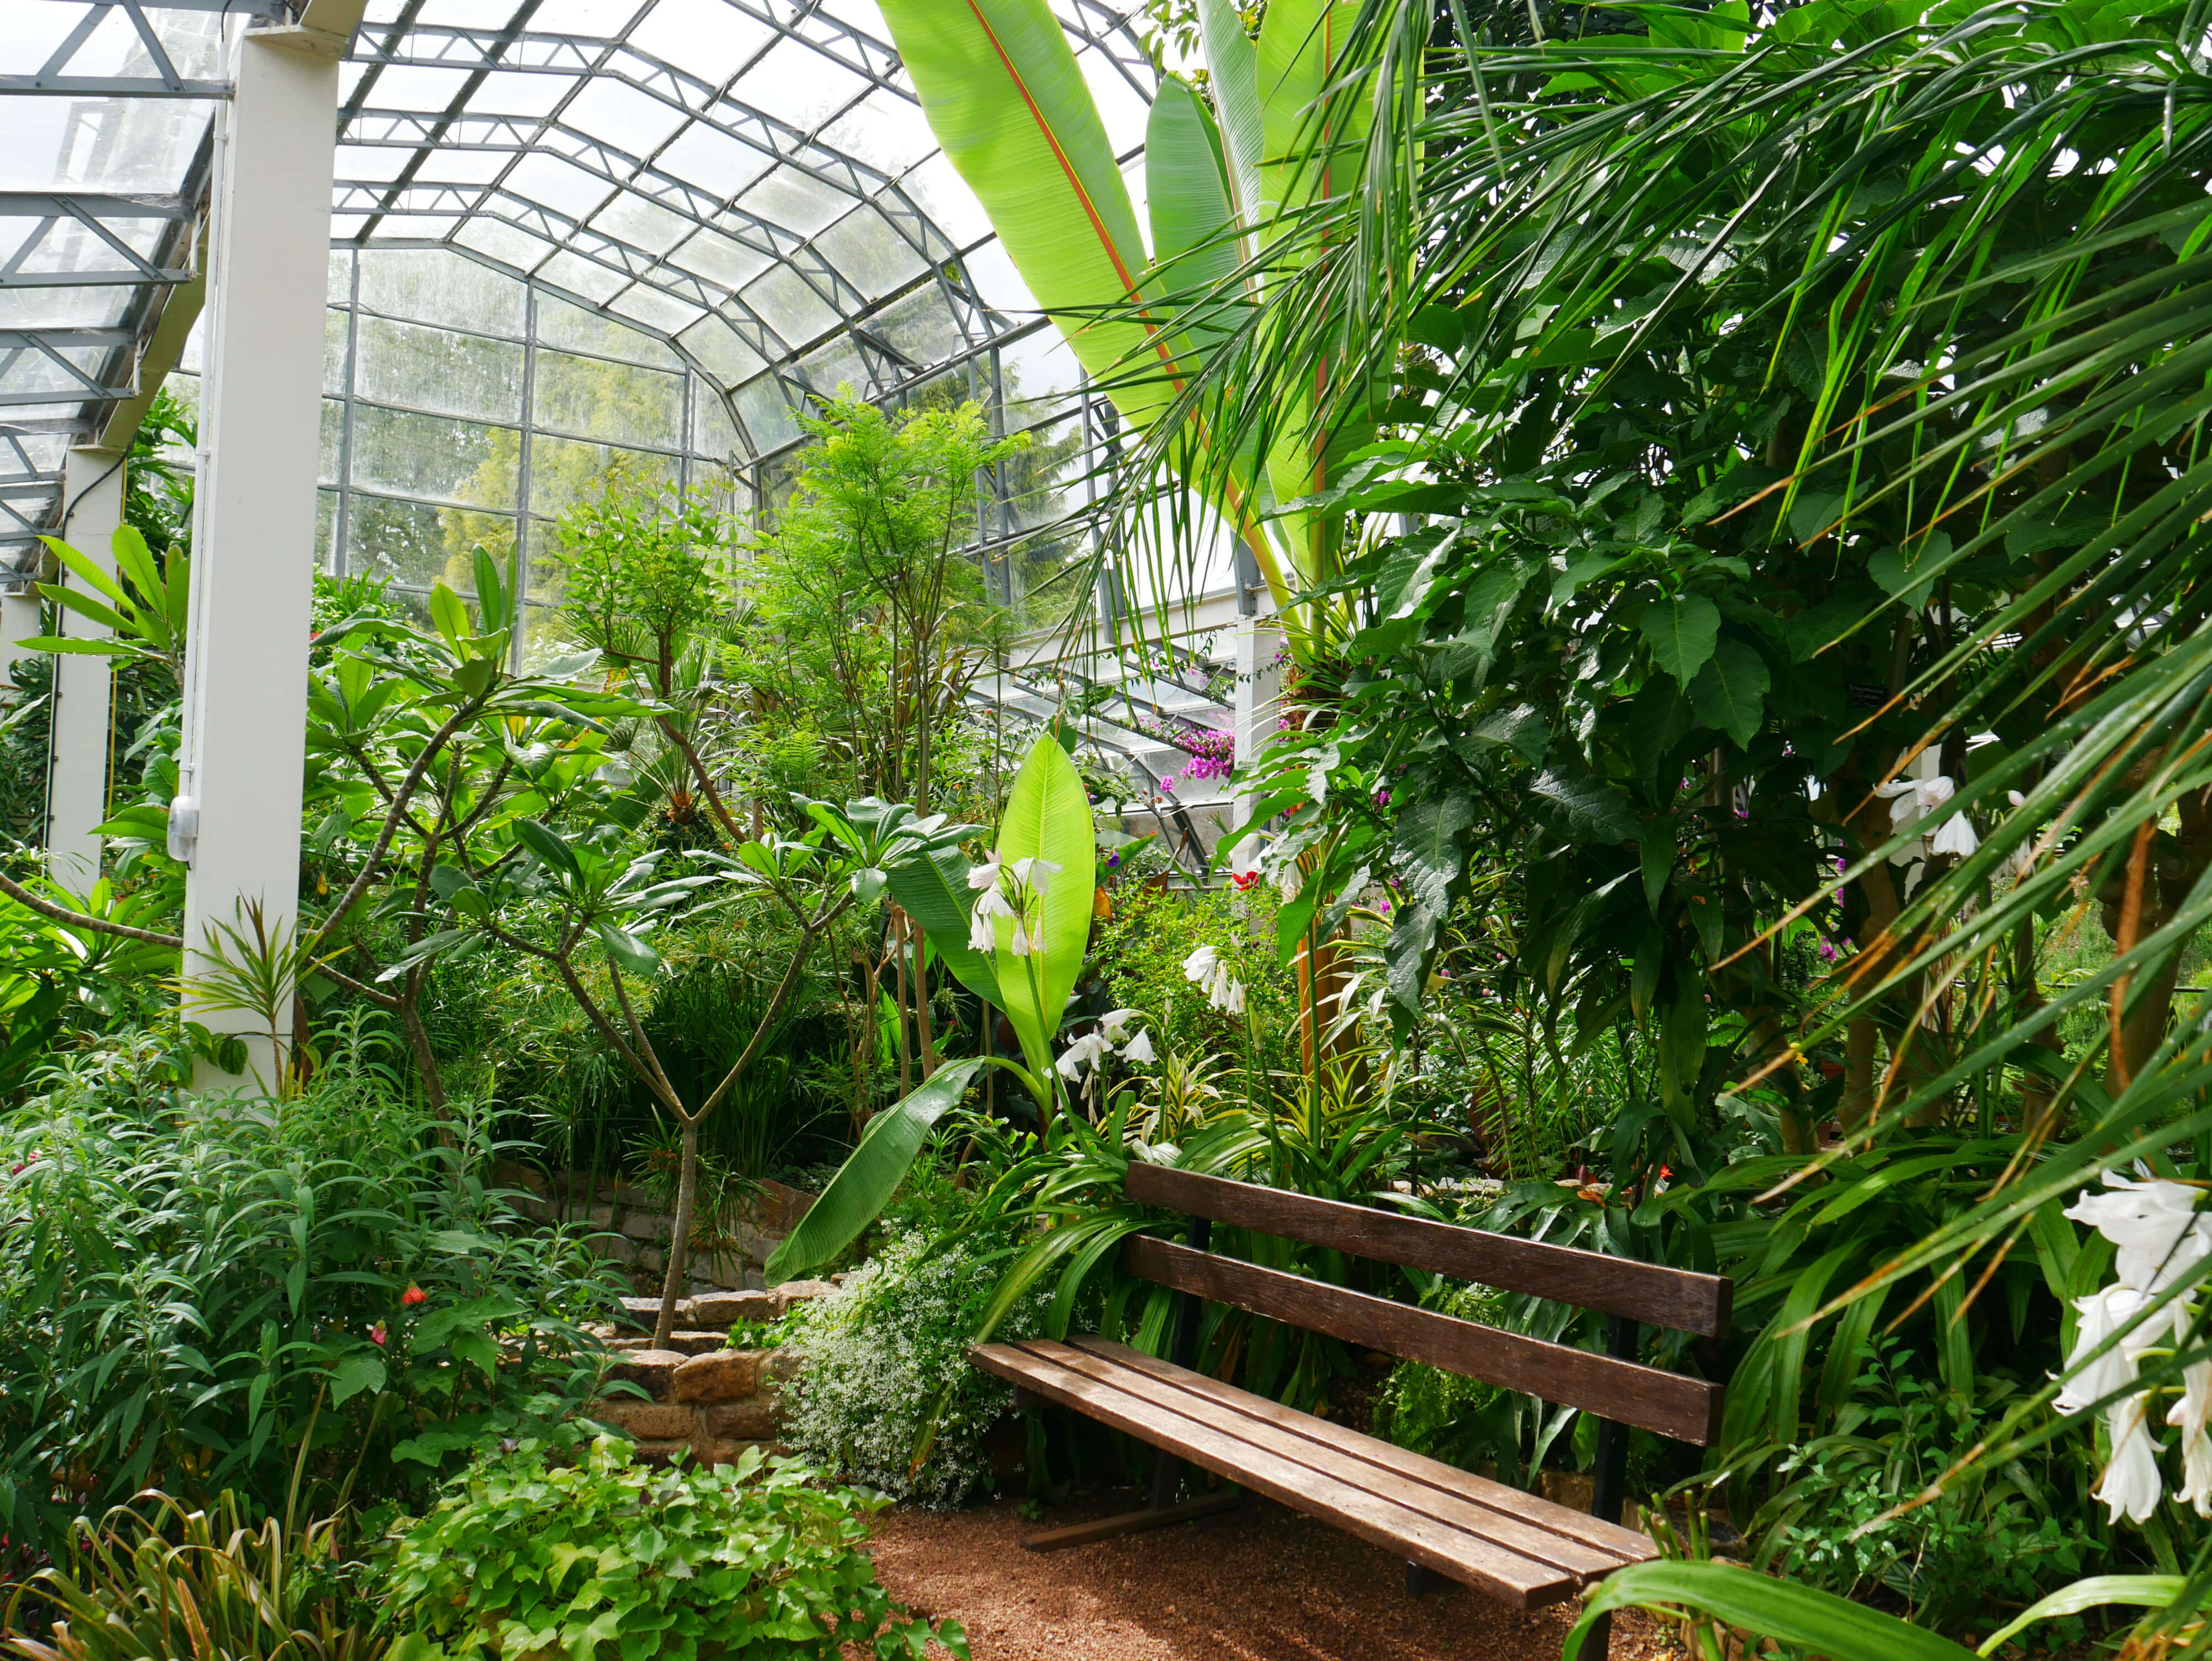 Short breaks in Torquay - the Palm House at Torre Abbey, an all year round attraction.